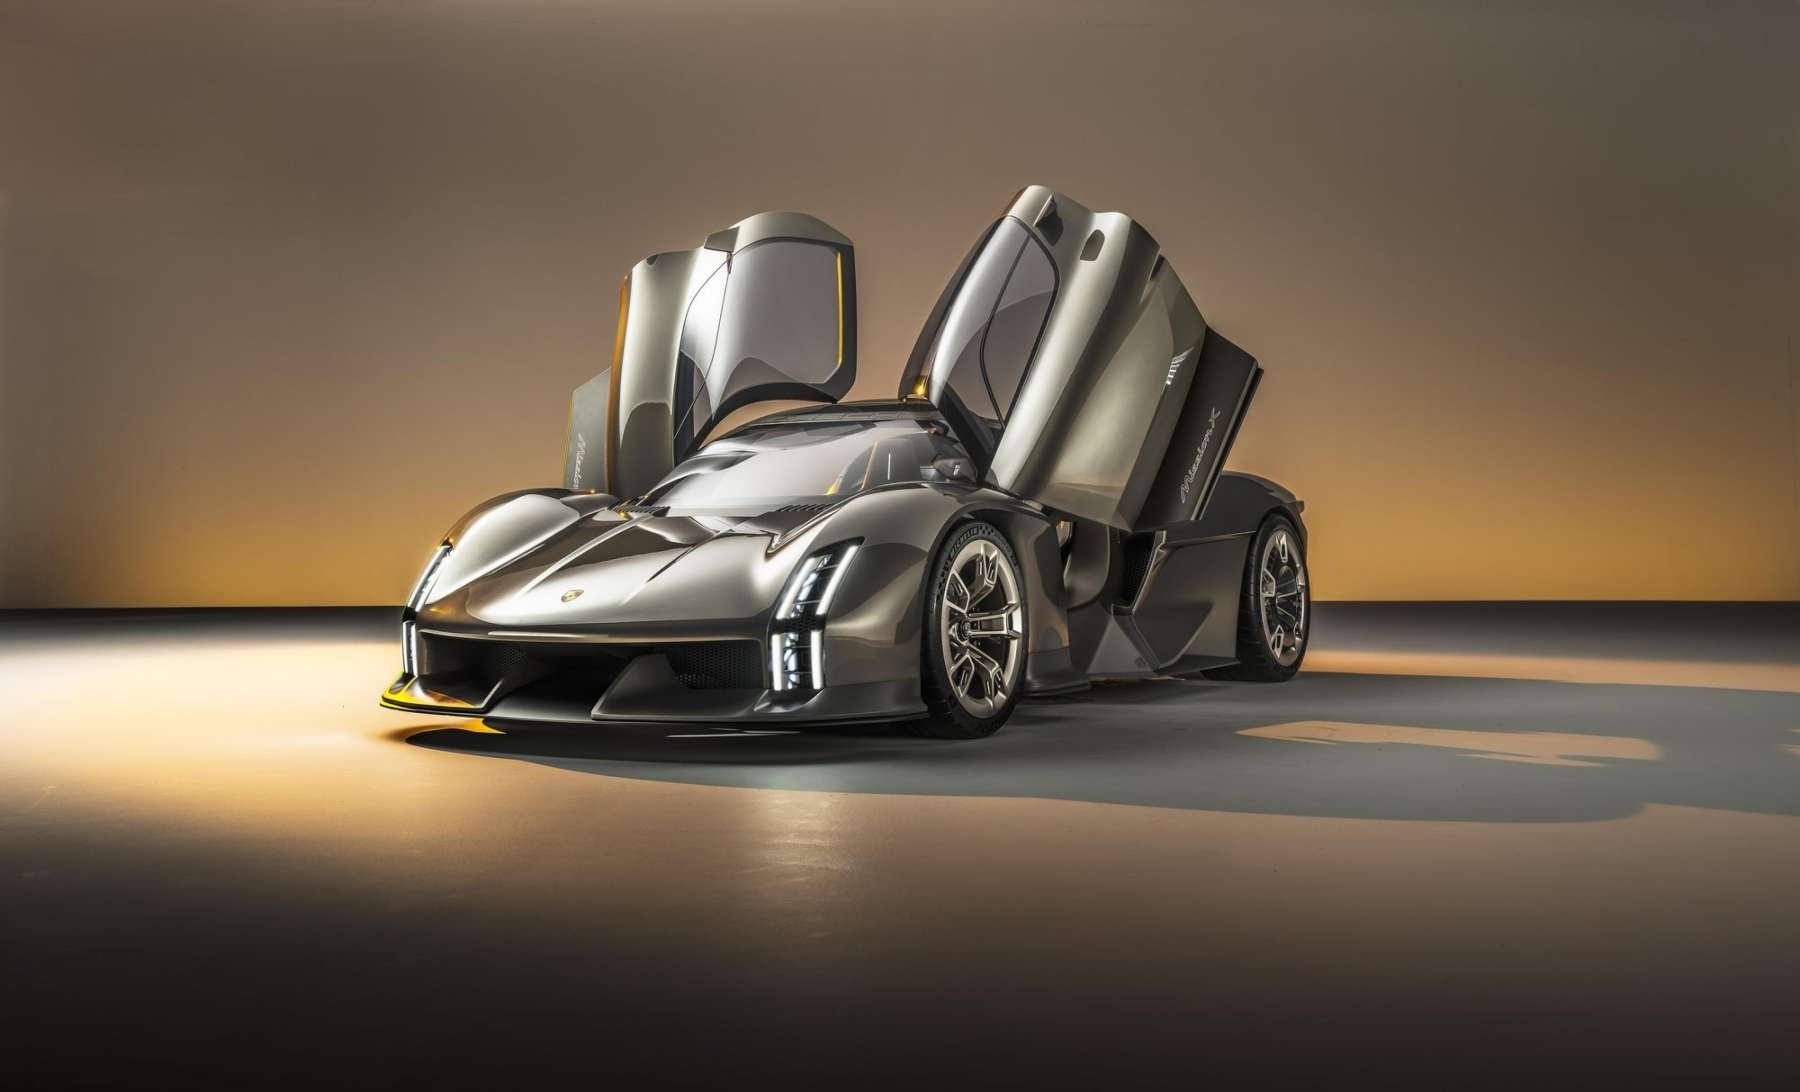 Mission X: Porsche's Vision of the Future of Hypercars